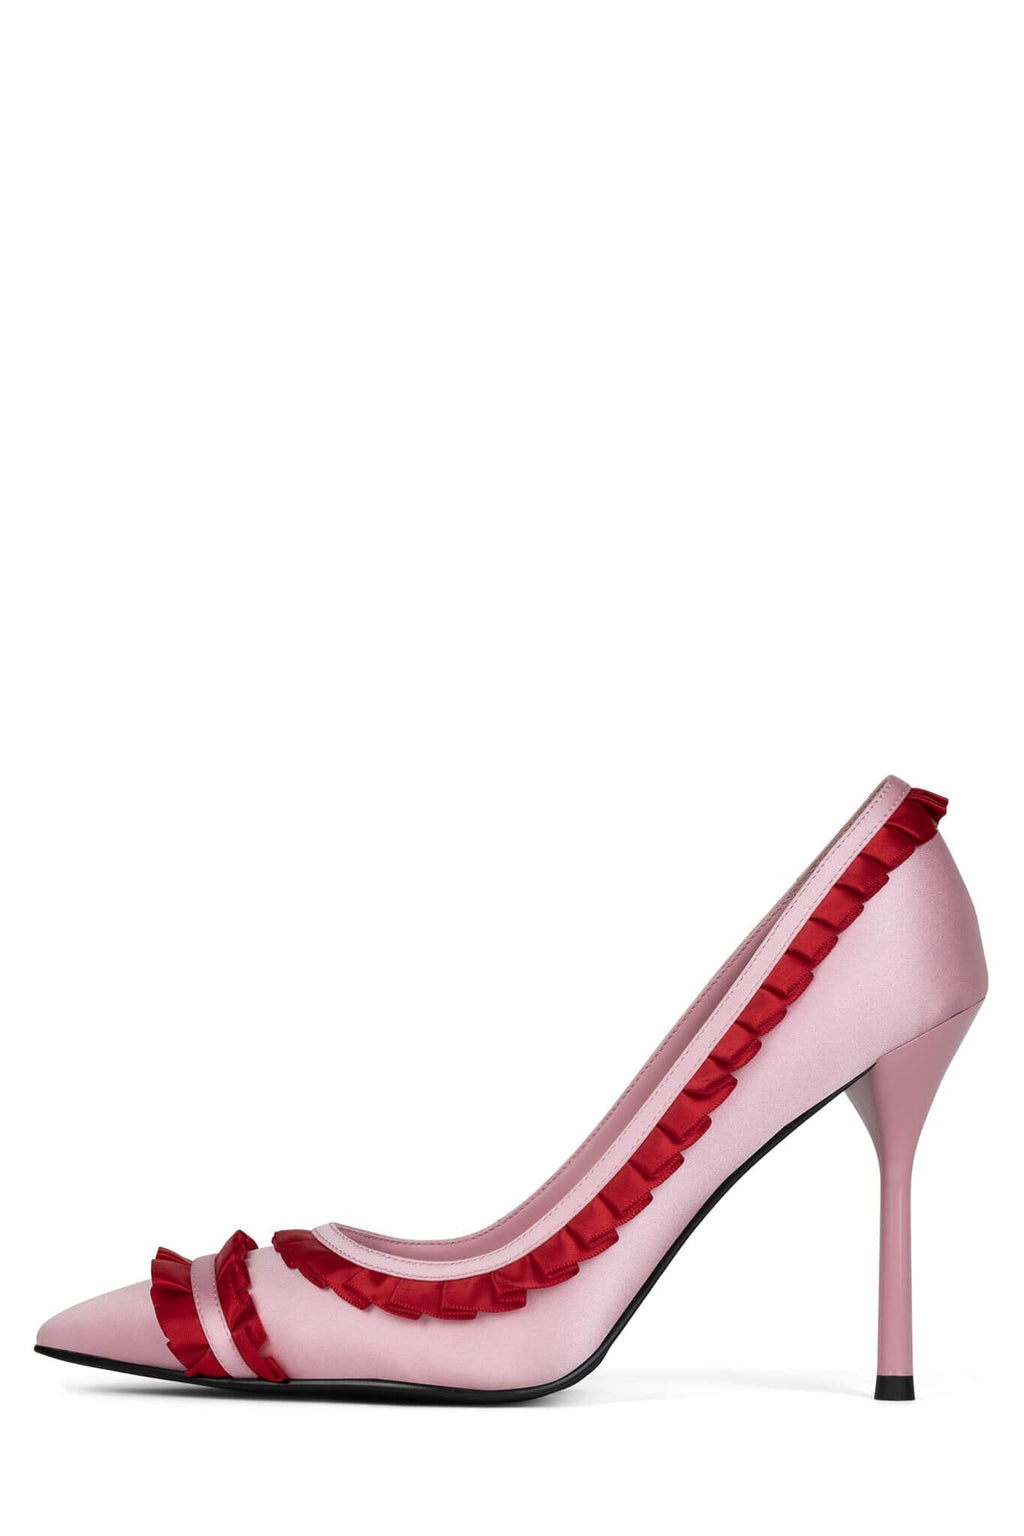 Buy The Red Heels Book Online at Low Prices in India | The Red Heels  Reviews & Ratings - Amazon.in